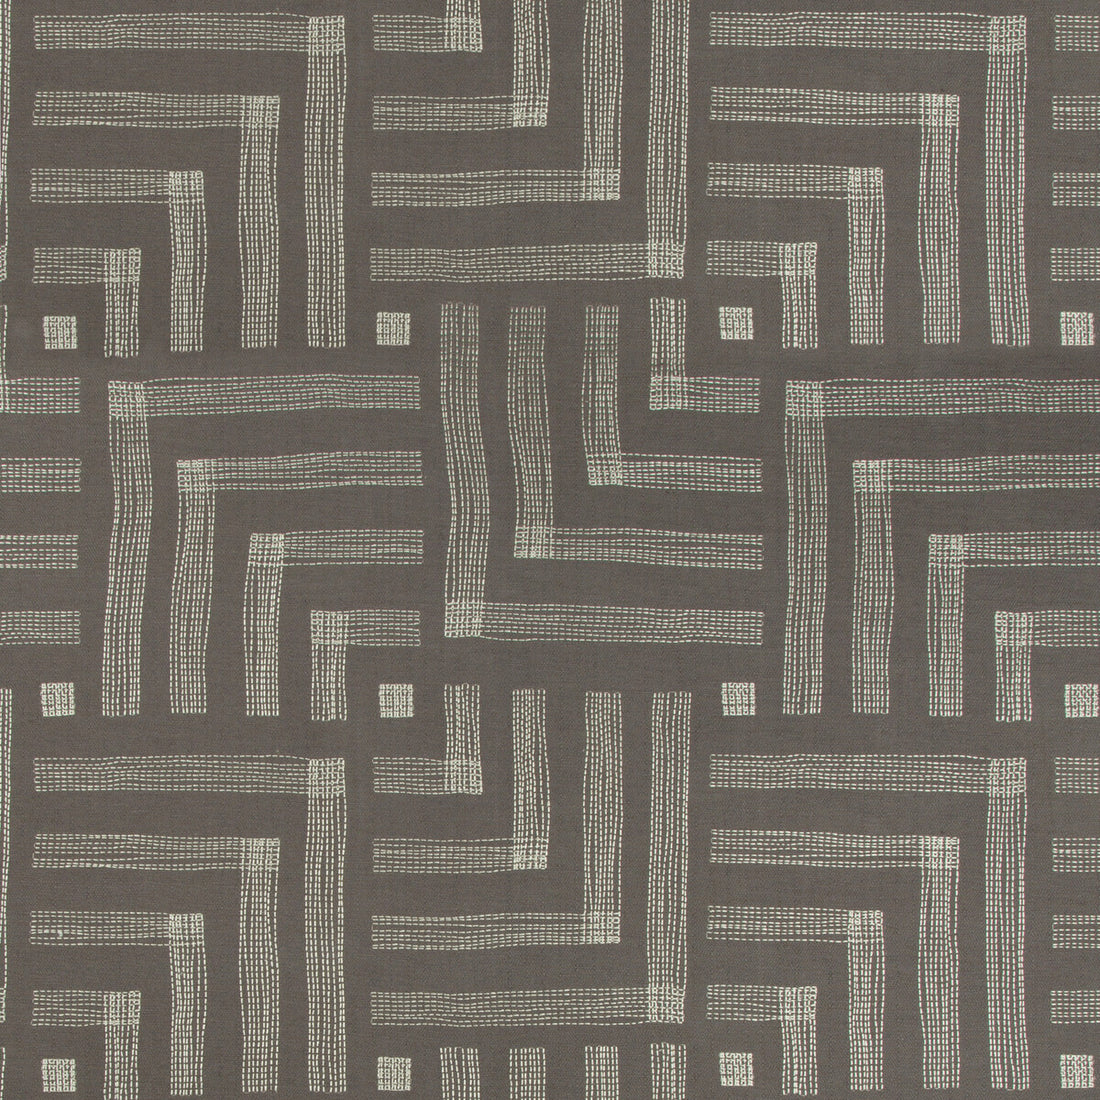 Pastiche fabric in mocha/cream color - pattern GWF-3726.811.0 - by Lee Jofa Modern in the Kelly Wearstler IV collection